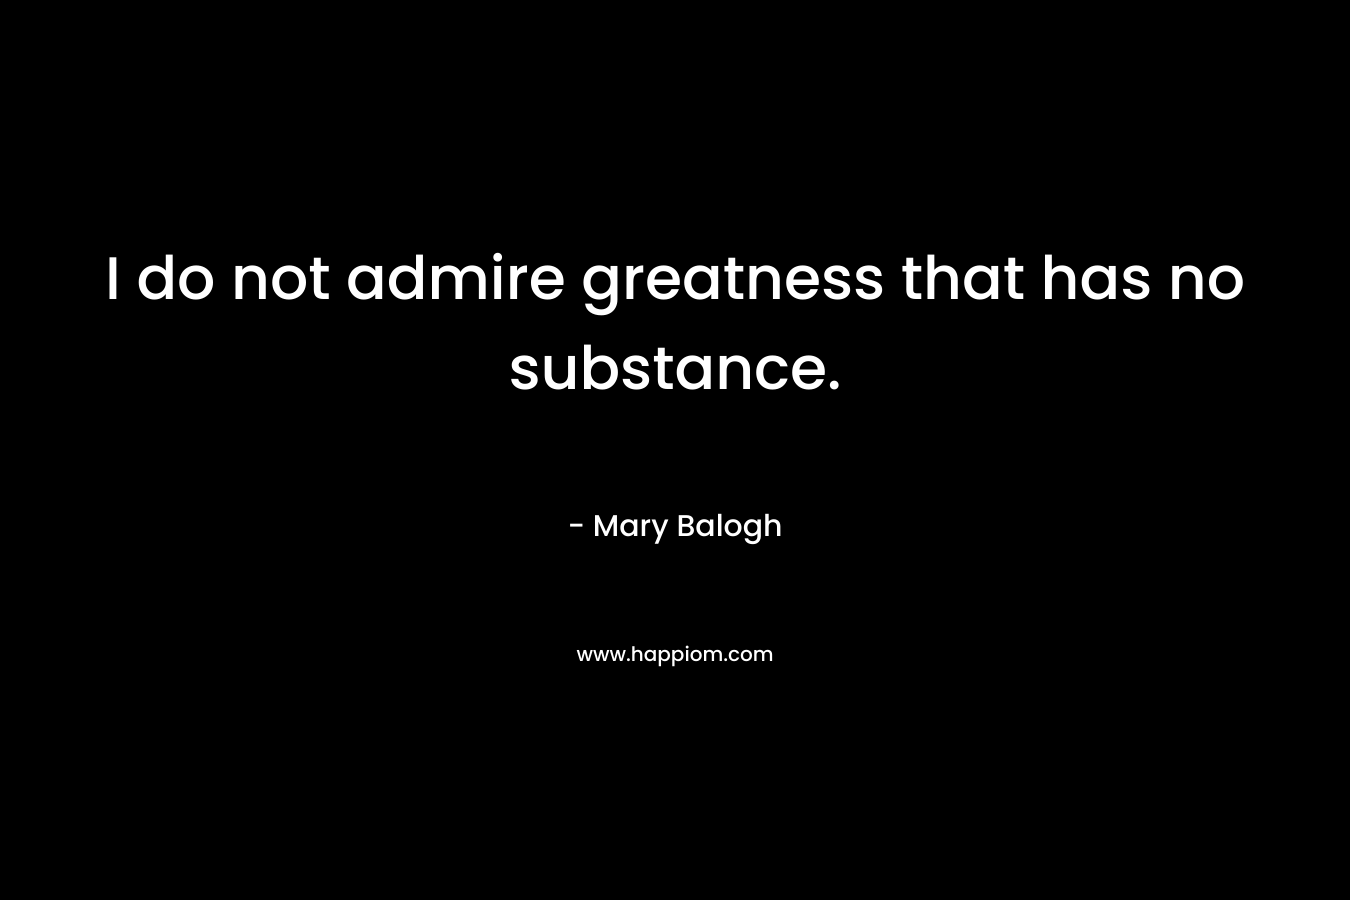 I do not admire greatness that has no substance.